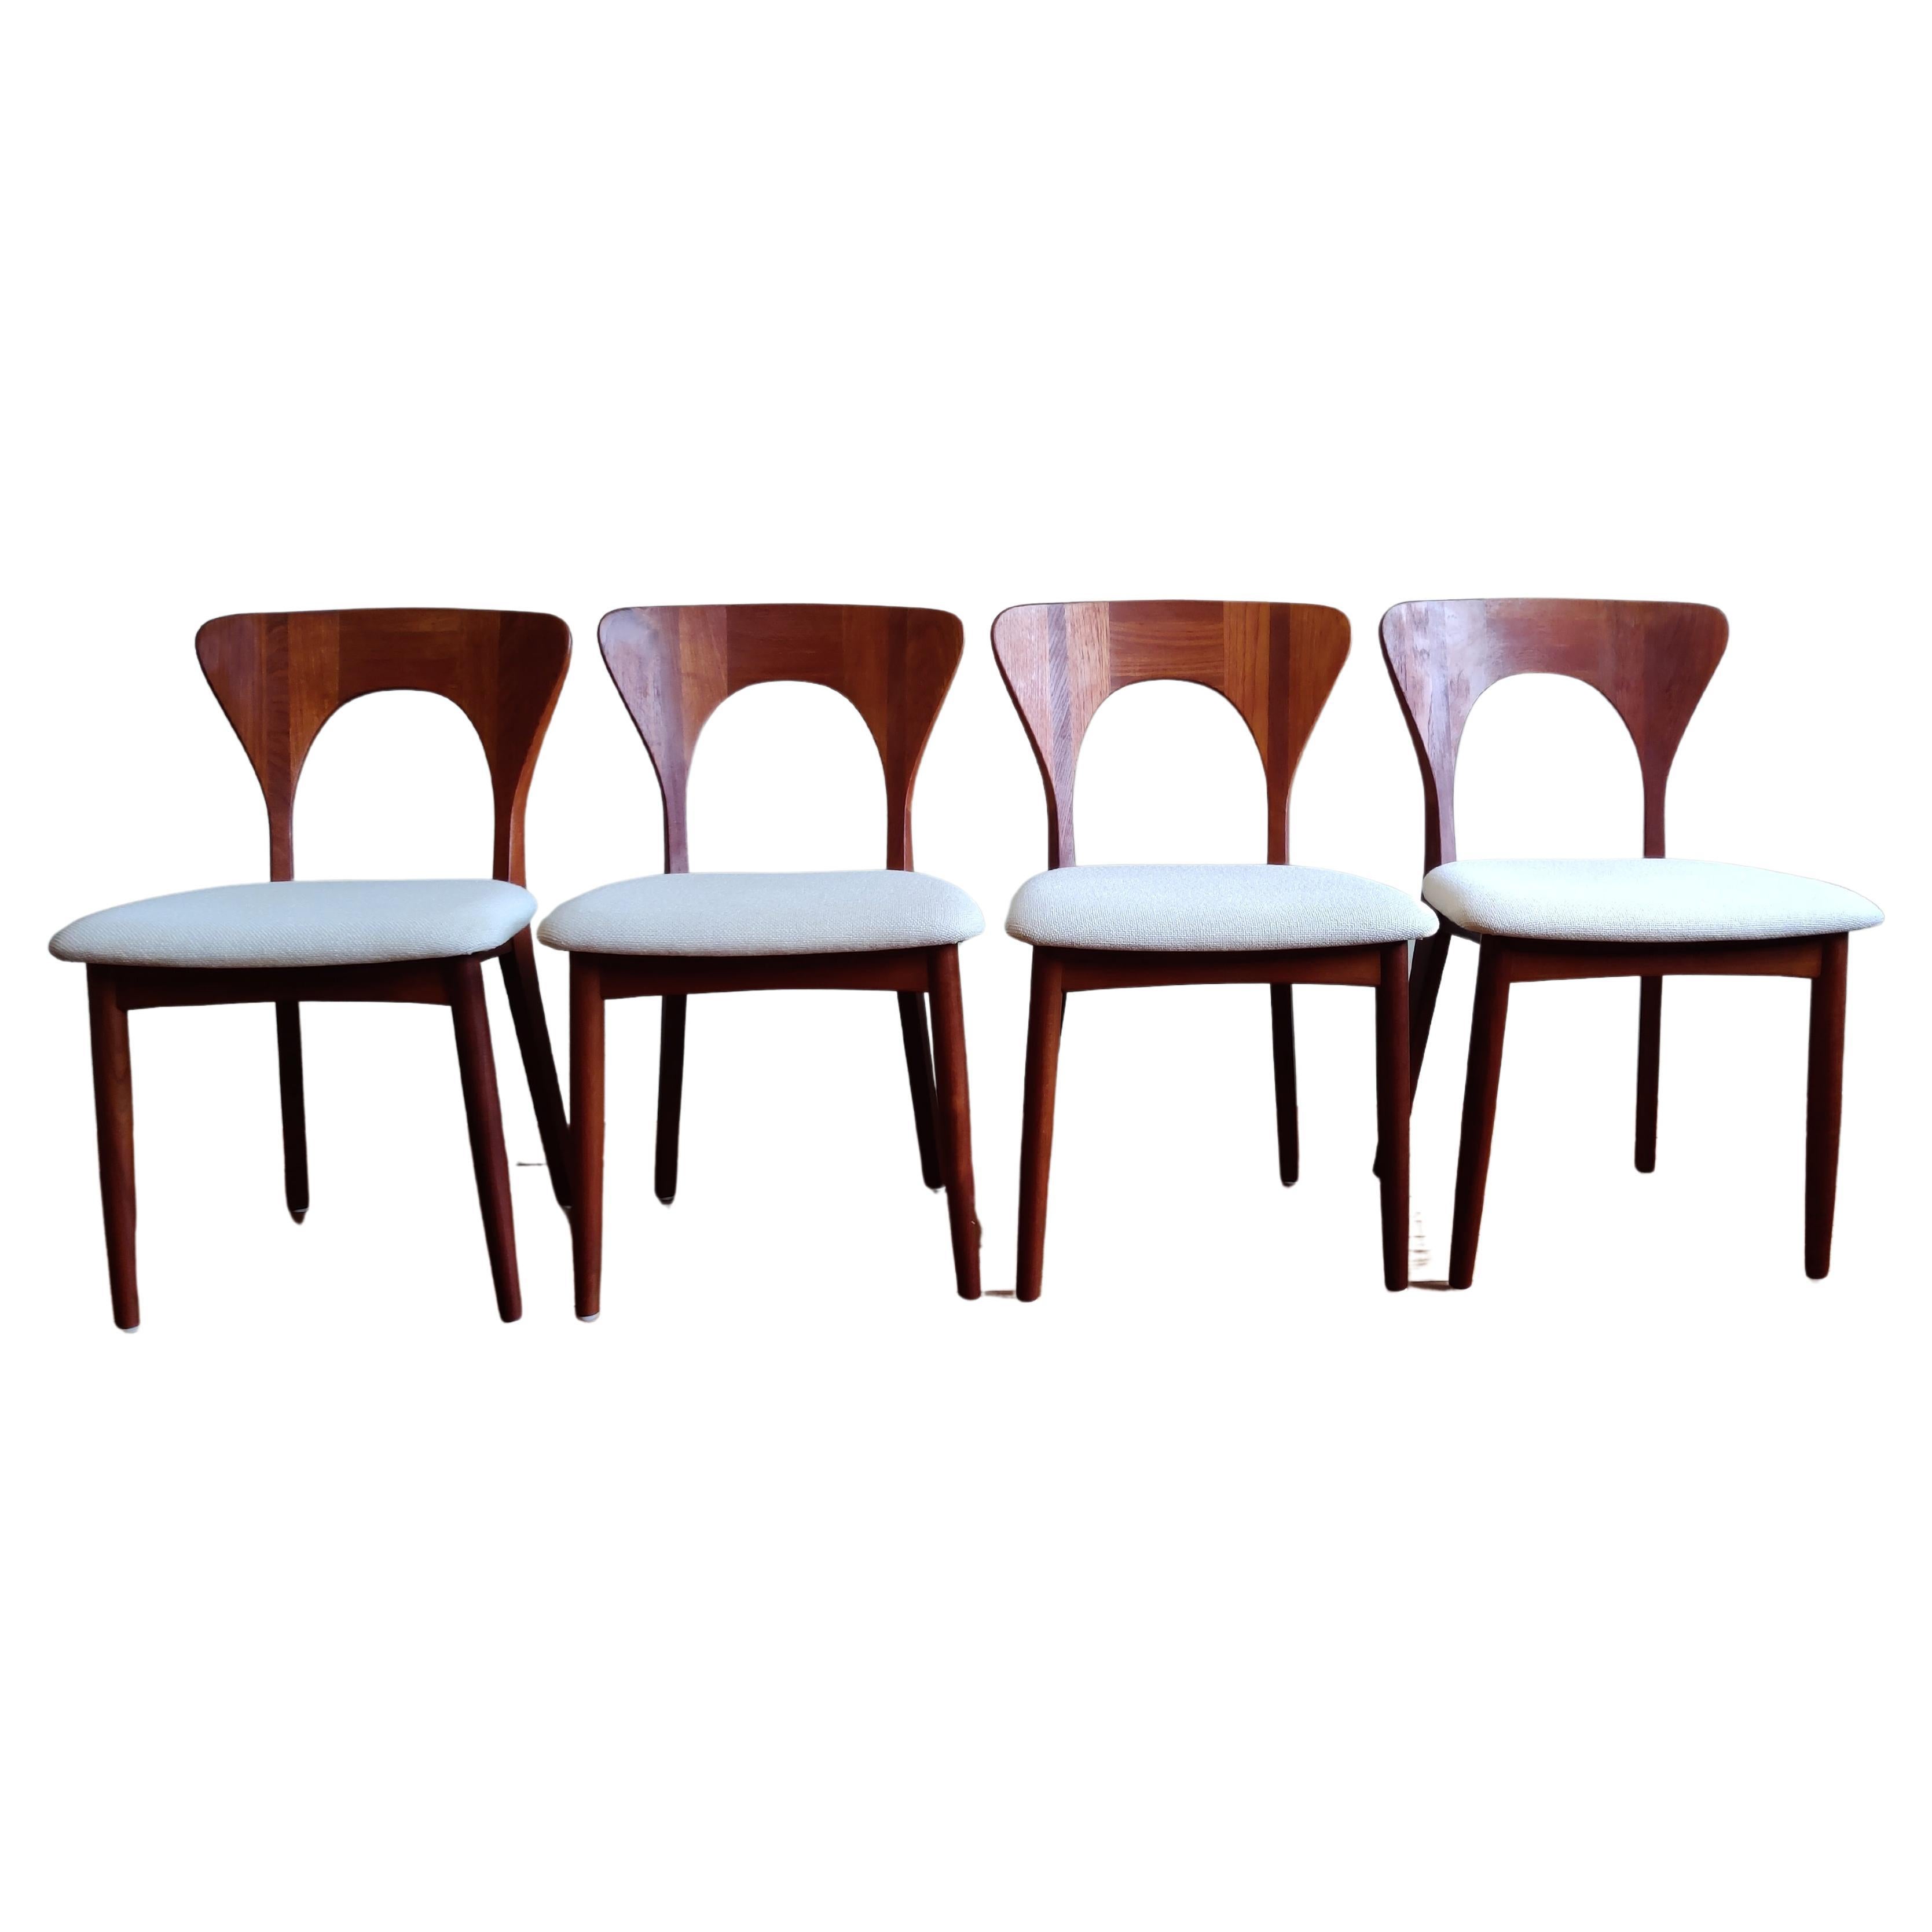 Danish dining chairs "Peter" by Niels Koefoed for Koefoeds Hornslet, Set of 4